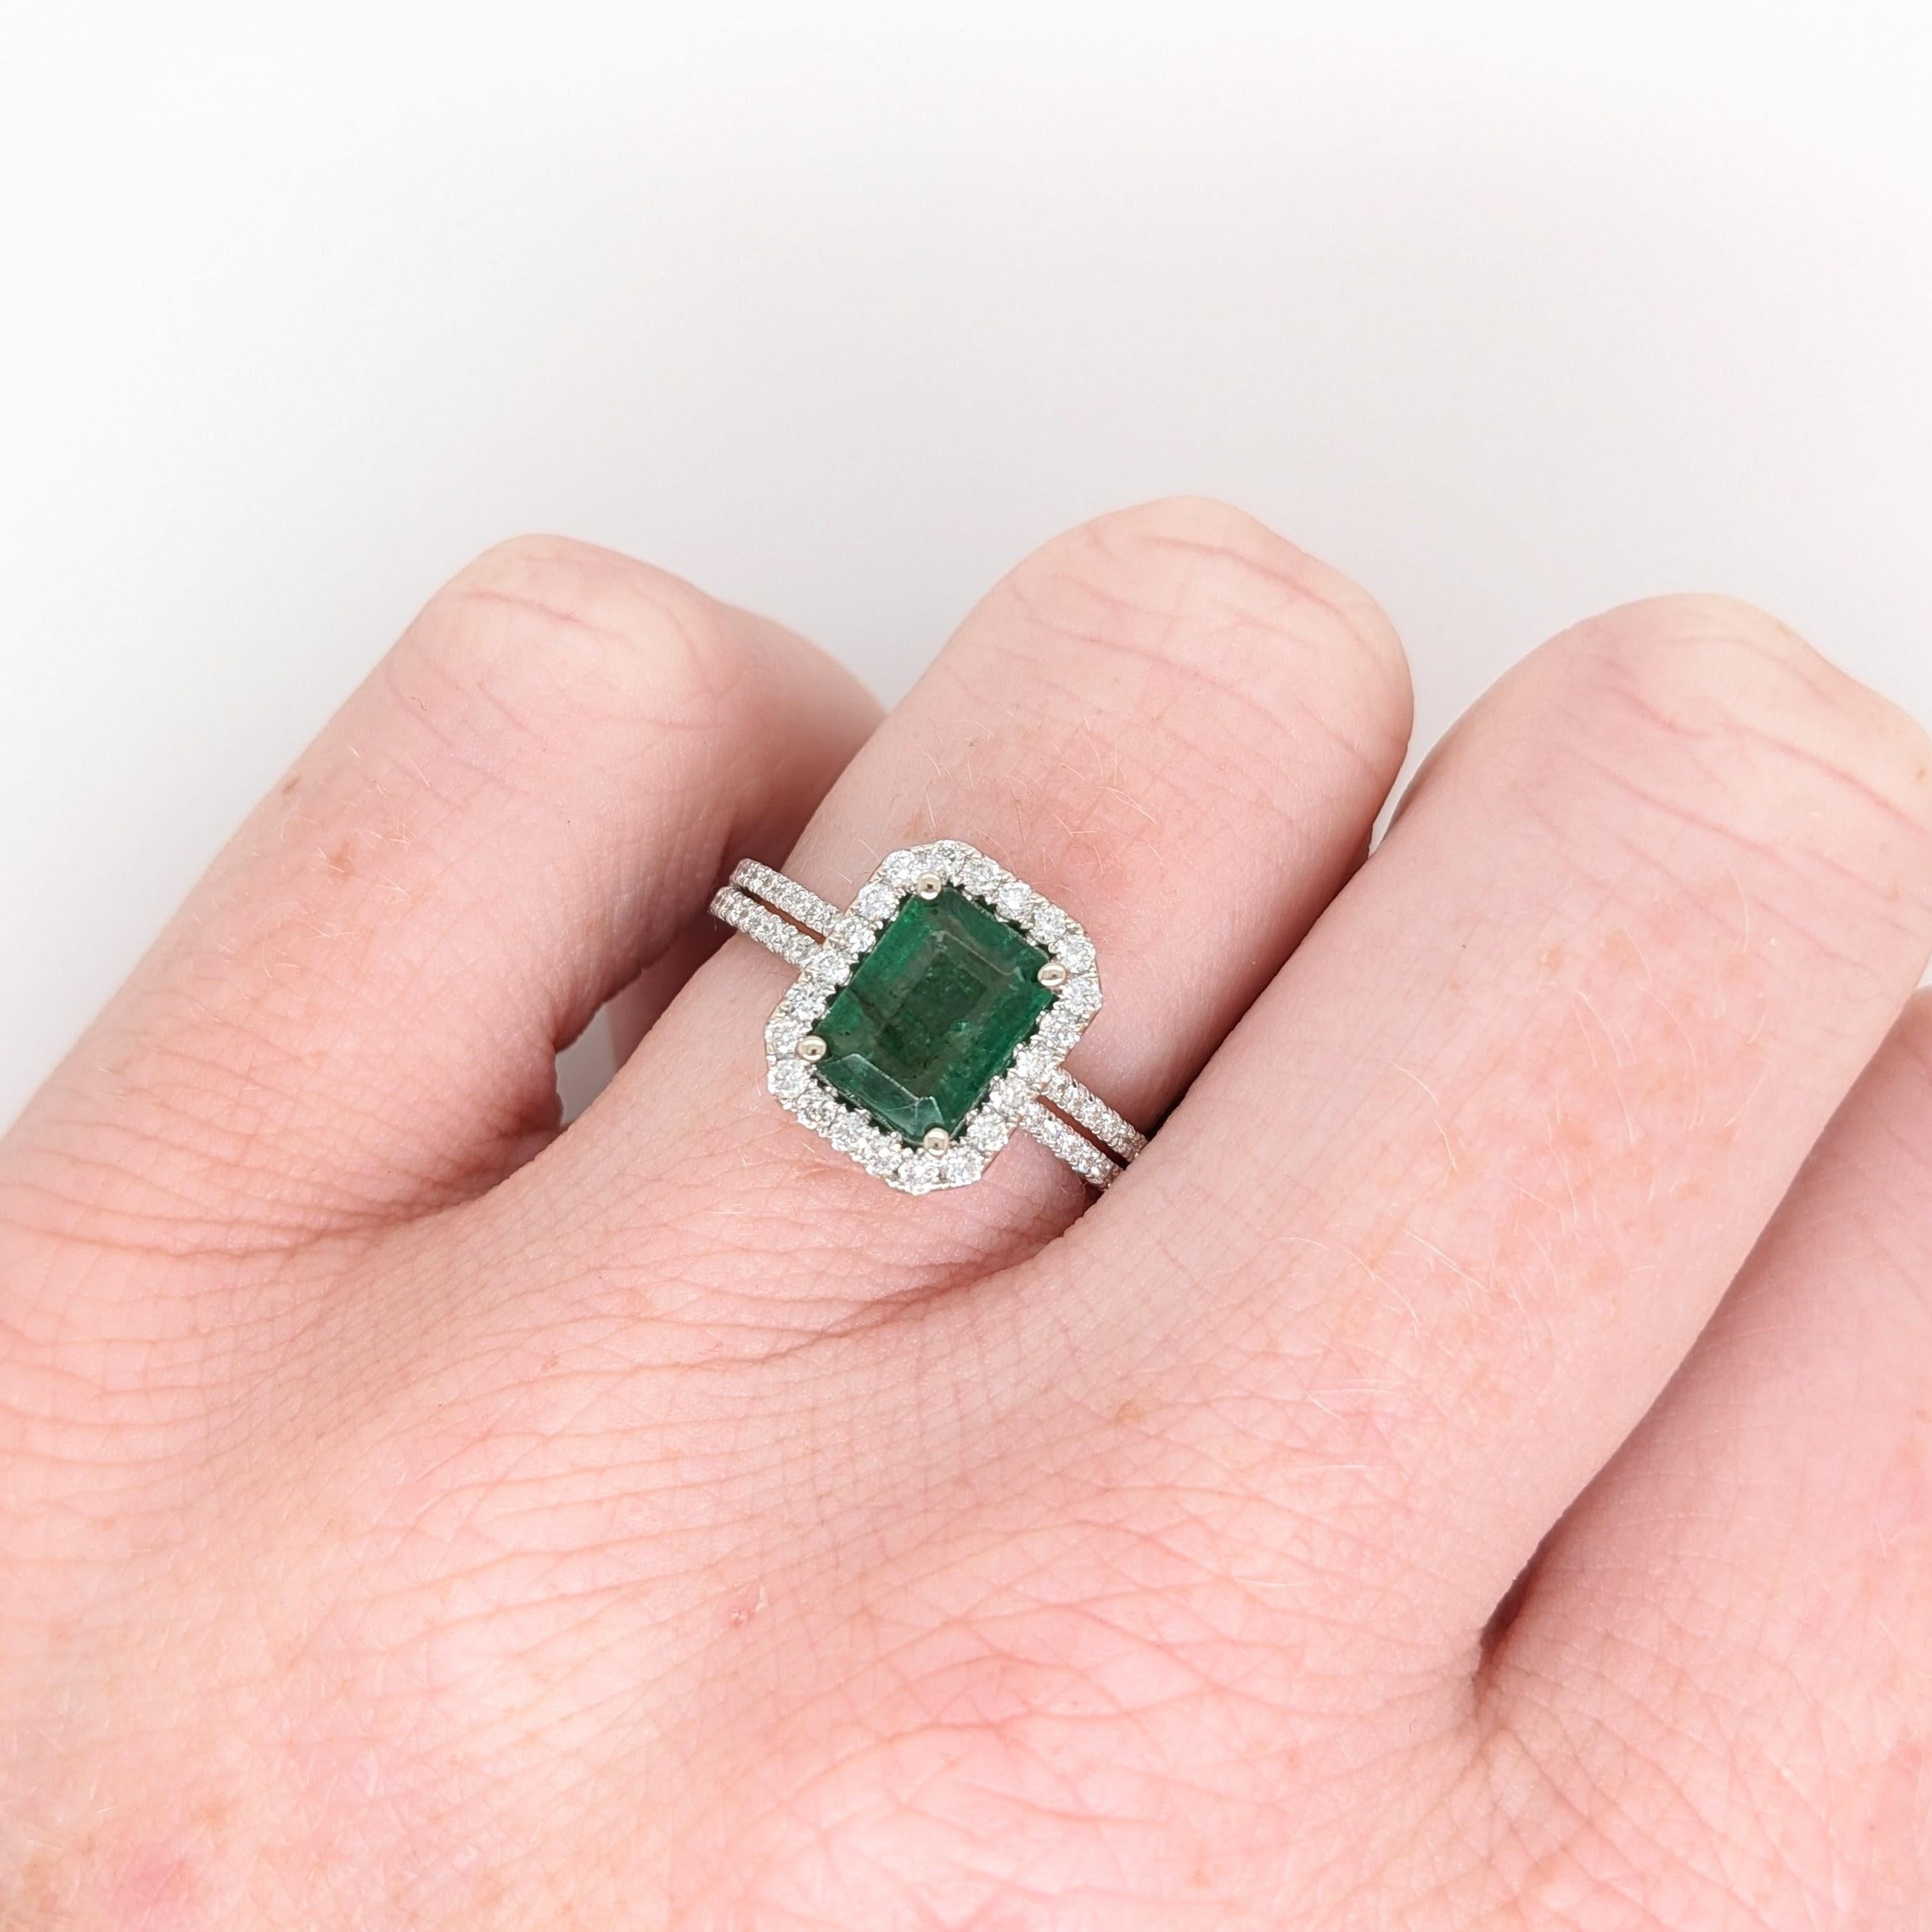 1.27ct Emerald Ring w Natural Diamond Halo in 14K White Gold Emerald Cut 8x6mm For Sale 2